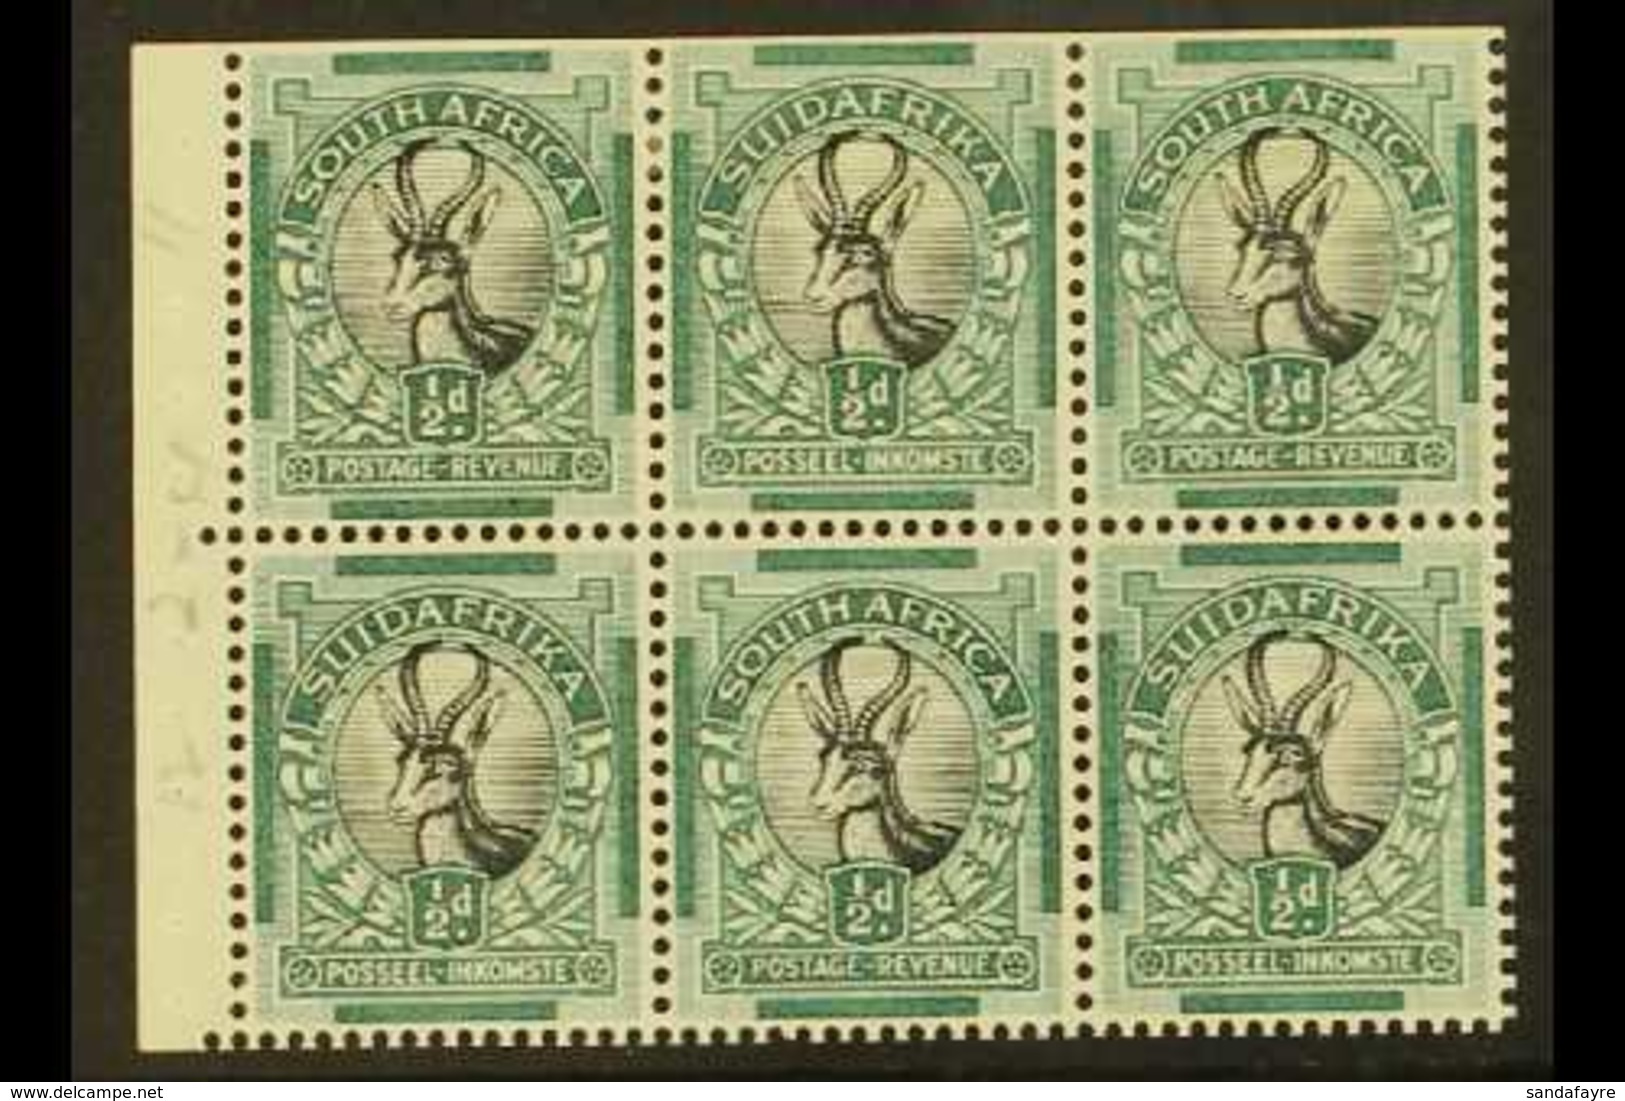 BOOKLET PANE 1930-1 ½d Watermark Upright, English Stamp First, COMPLETE PANE OF SIX from Rare 1930 2s6d Or 1931 3s Rotog - Non Classificati